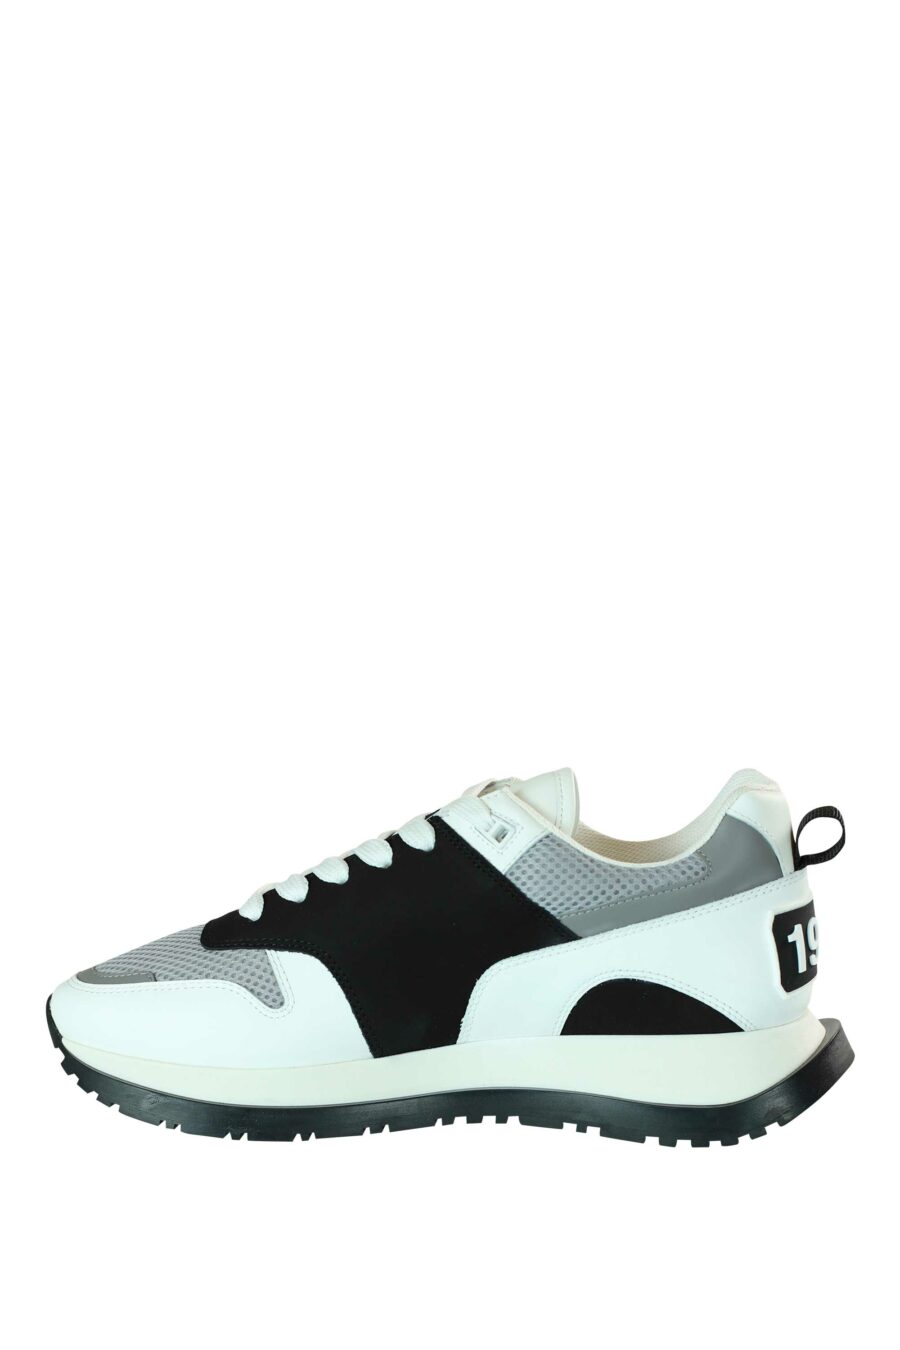 Black mix running shoes with logo on sole - 8055777205655 3